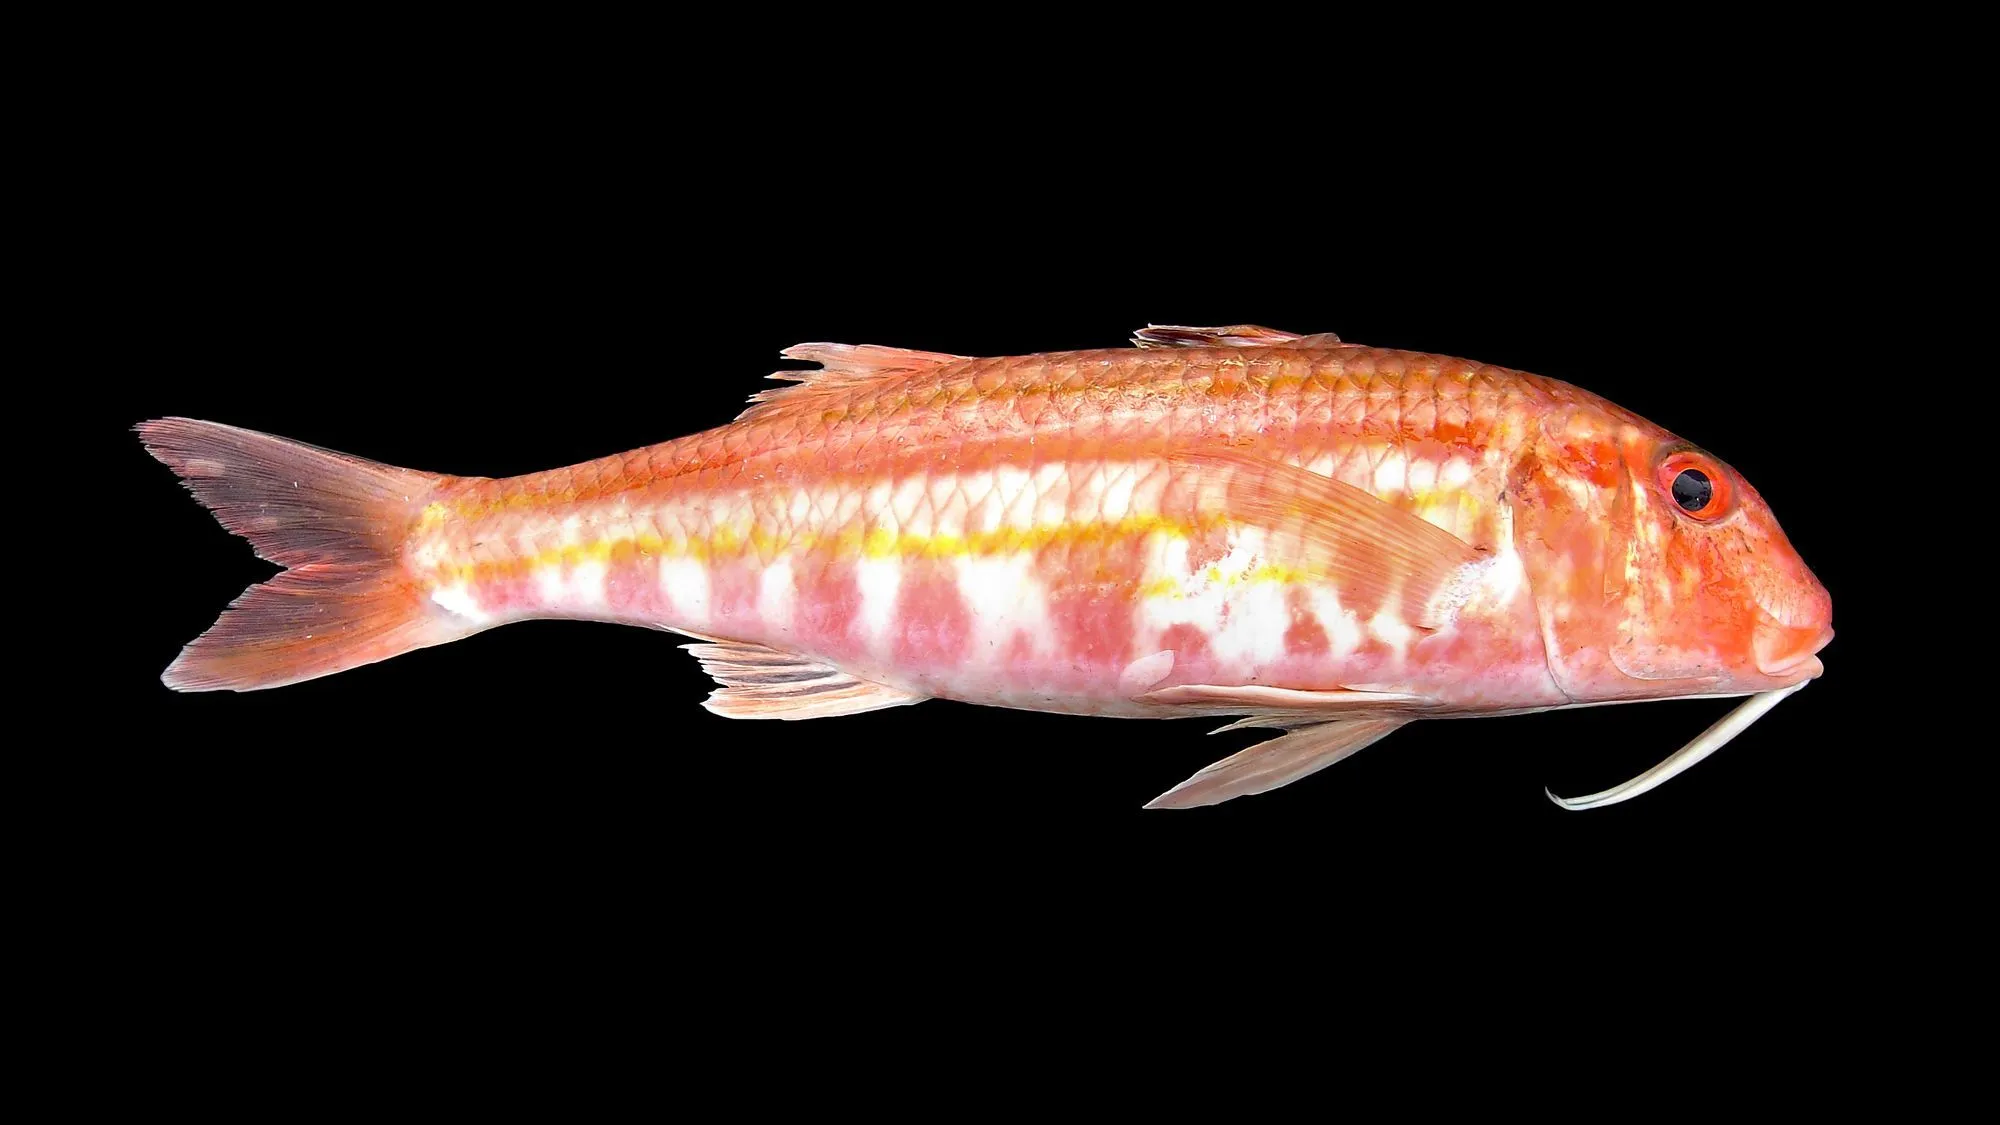 Rubyfish have a red to bright pinkish body coloration.